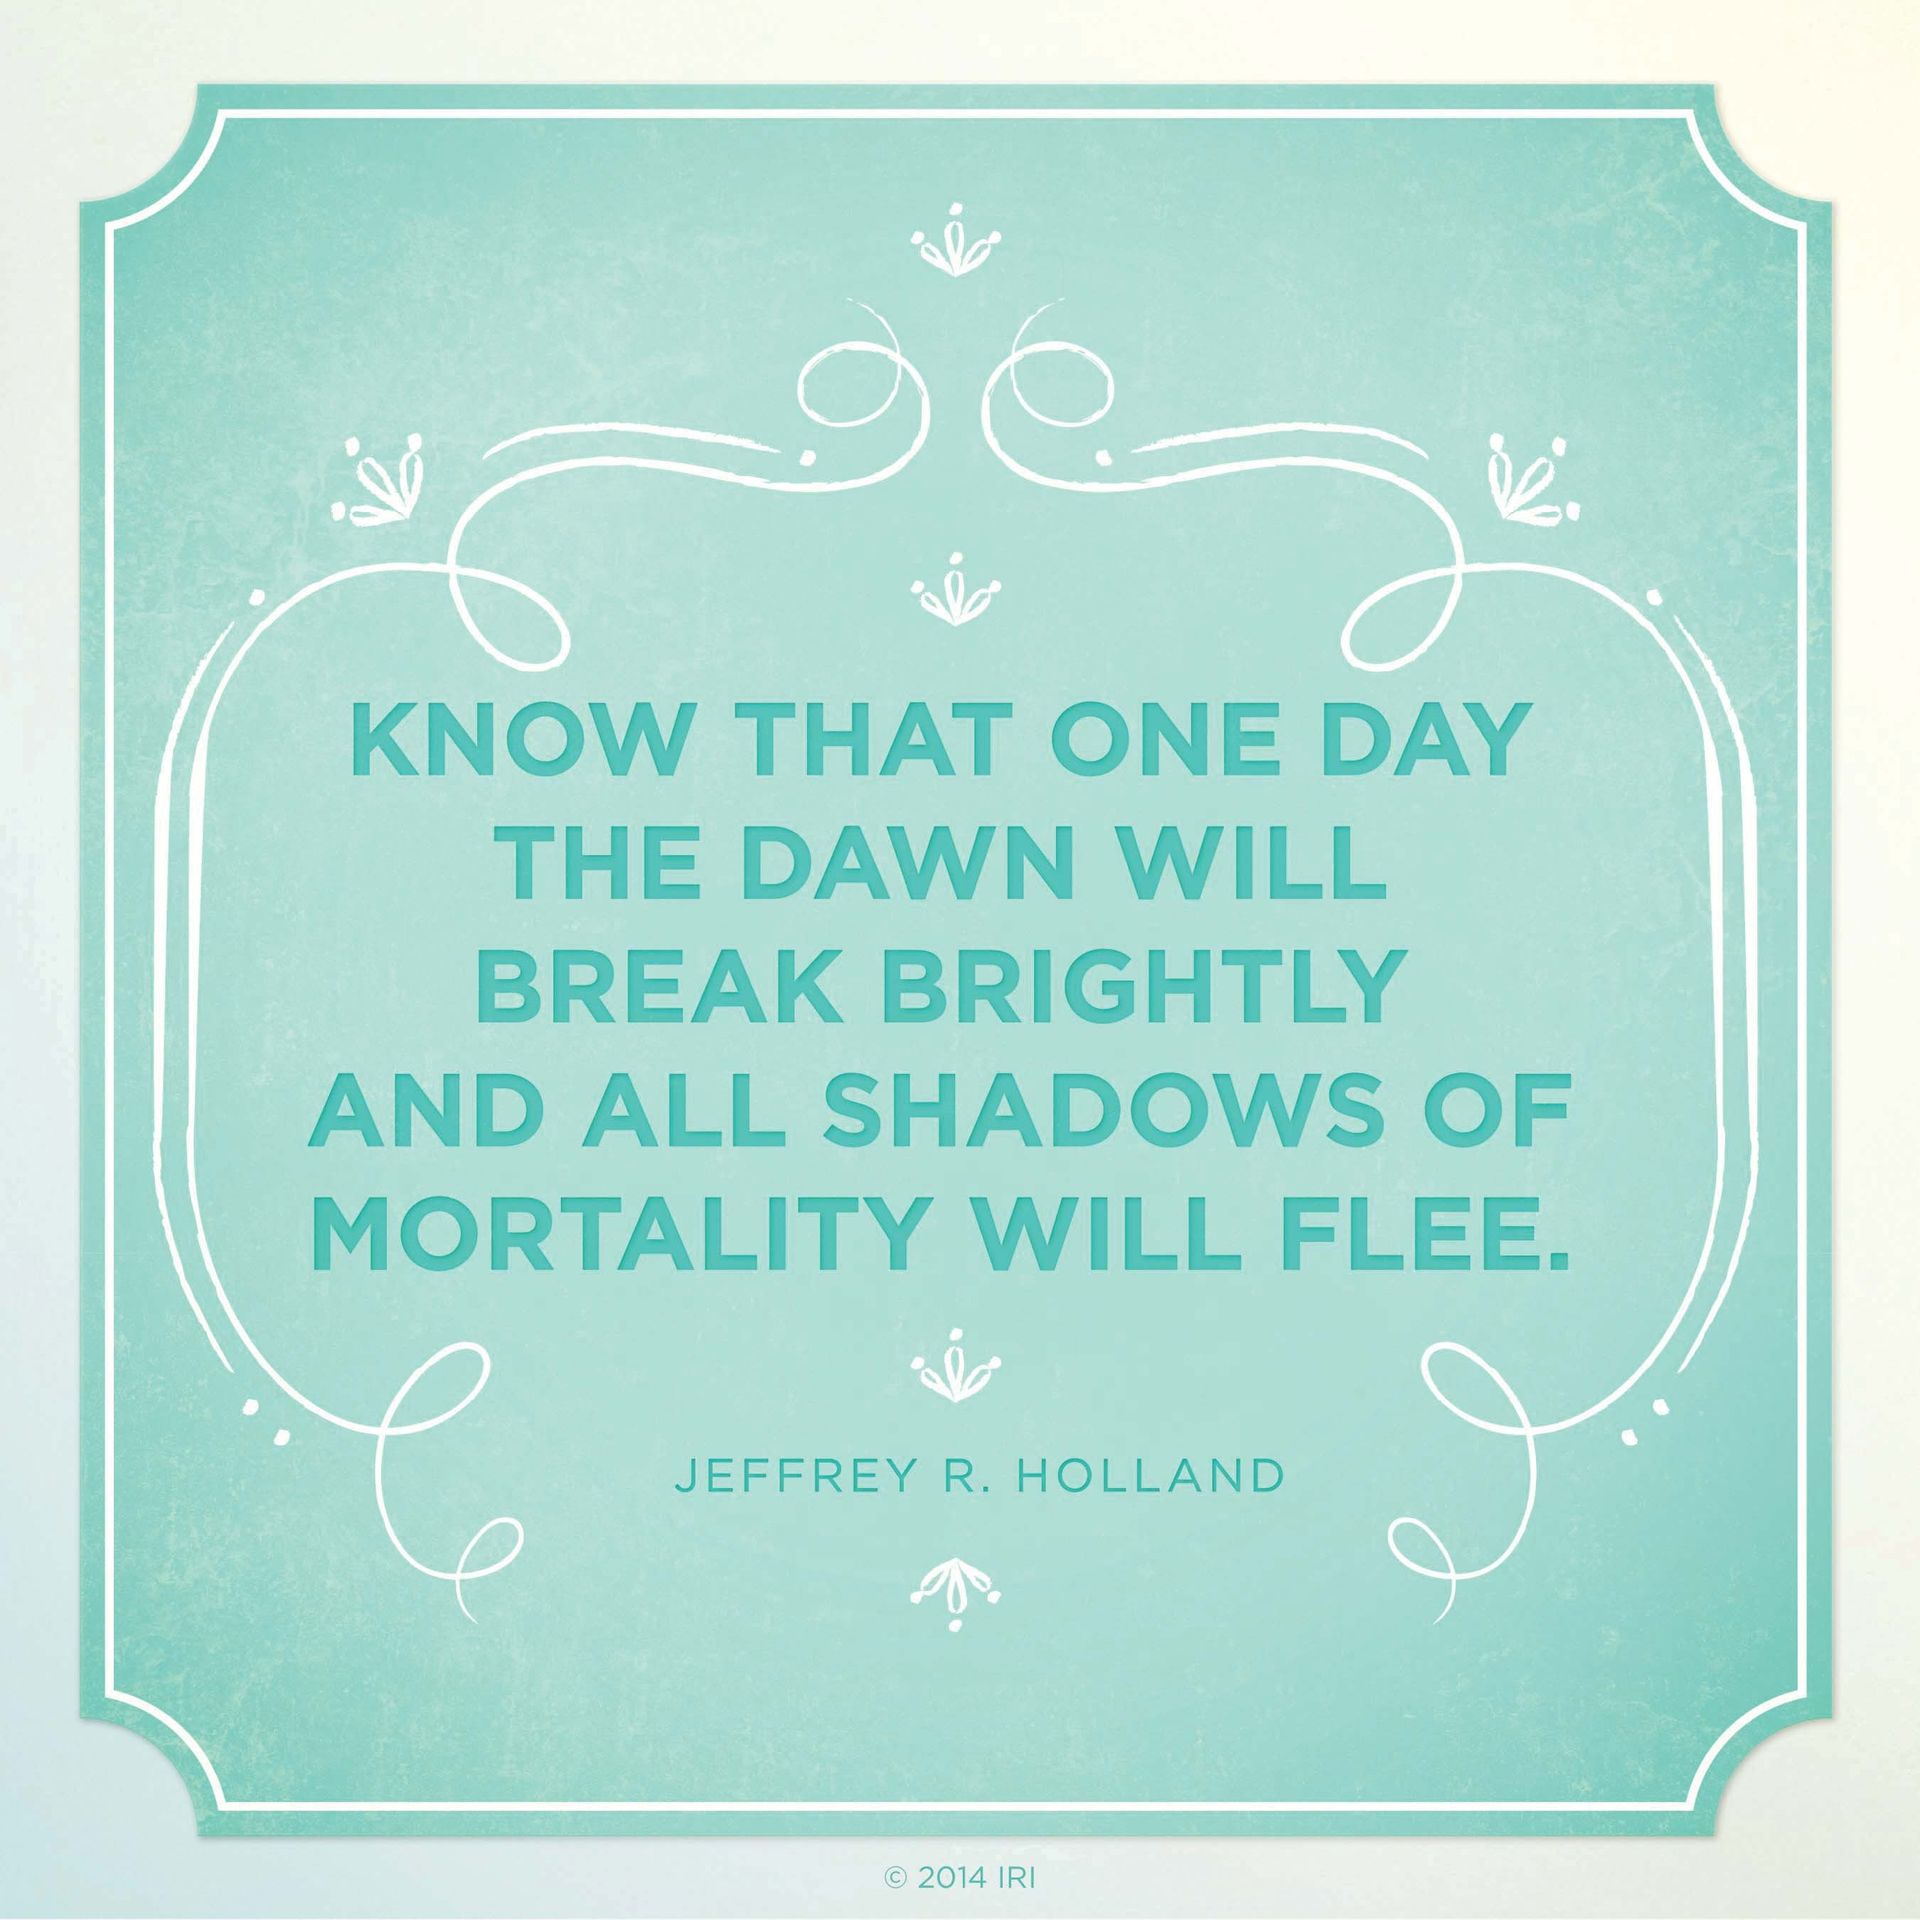 “Know that one day the dawn will break brightly and all shadows of mortality will flee.”—Elder Jeffrey R. Holland, “Like a Broken Vessel”